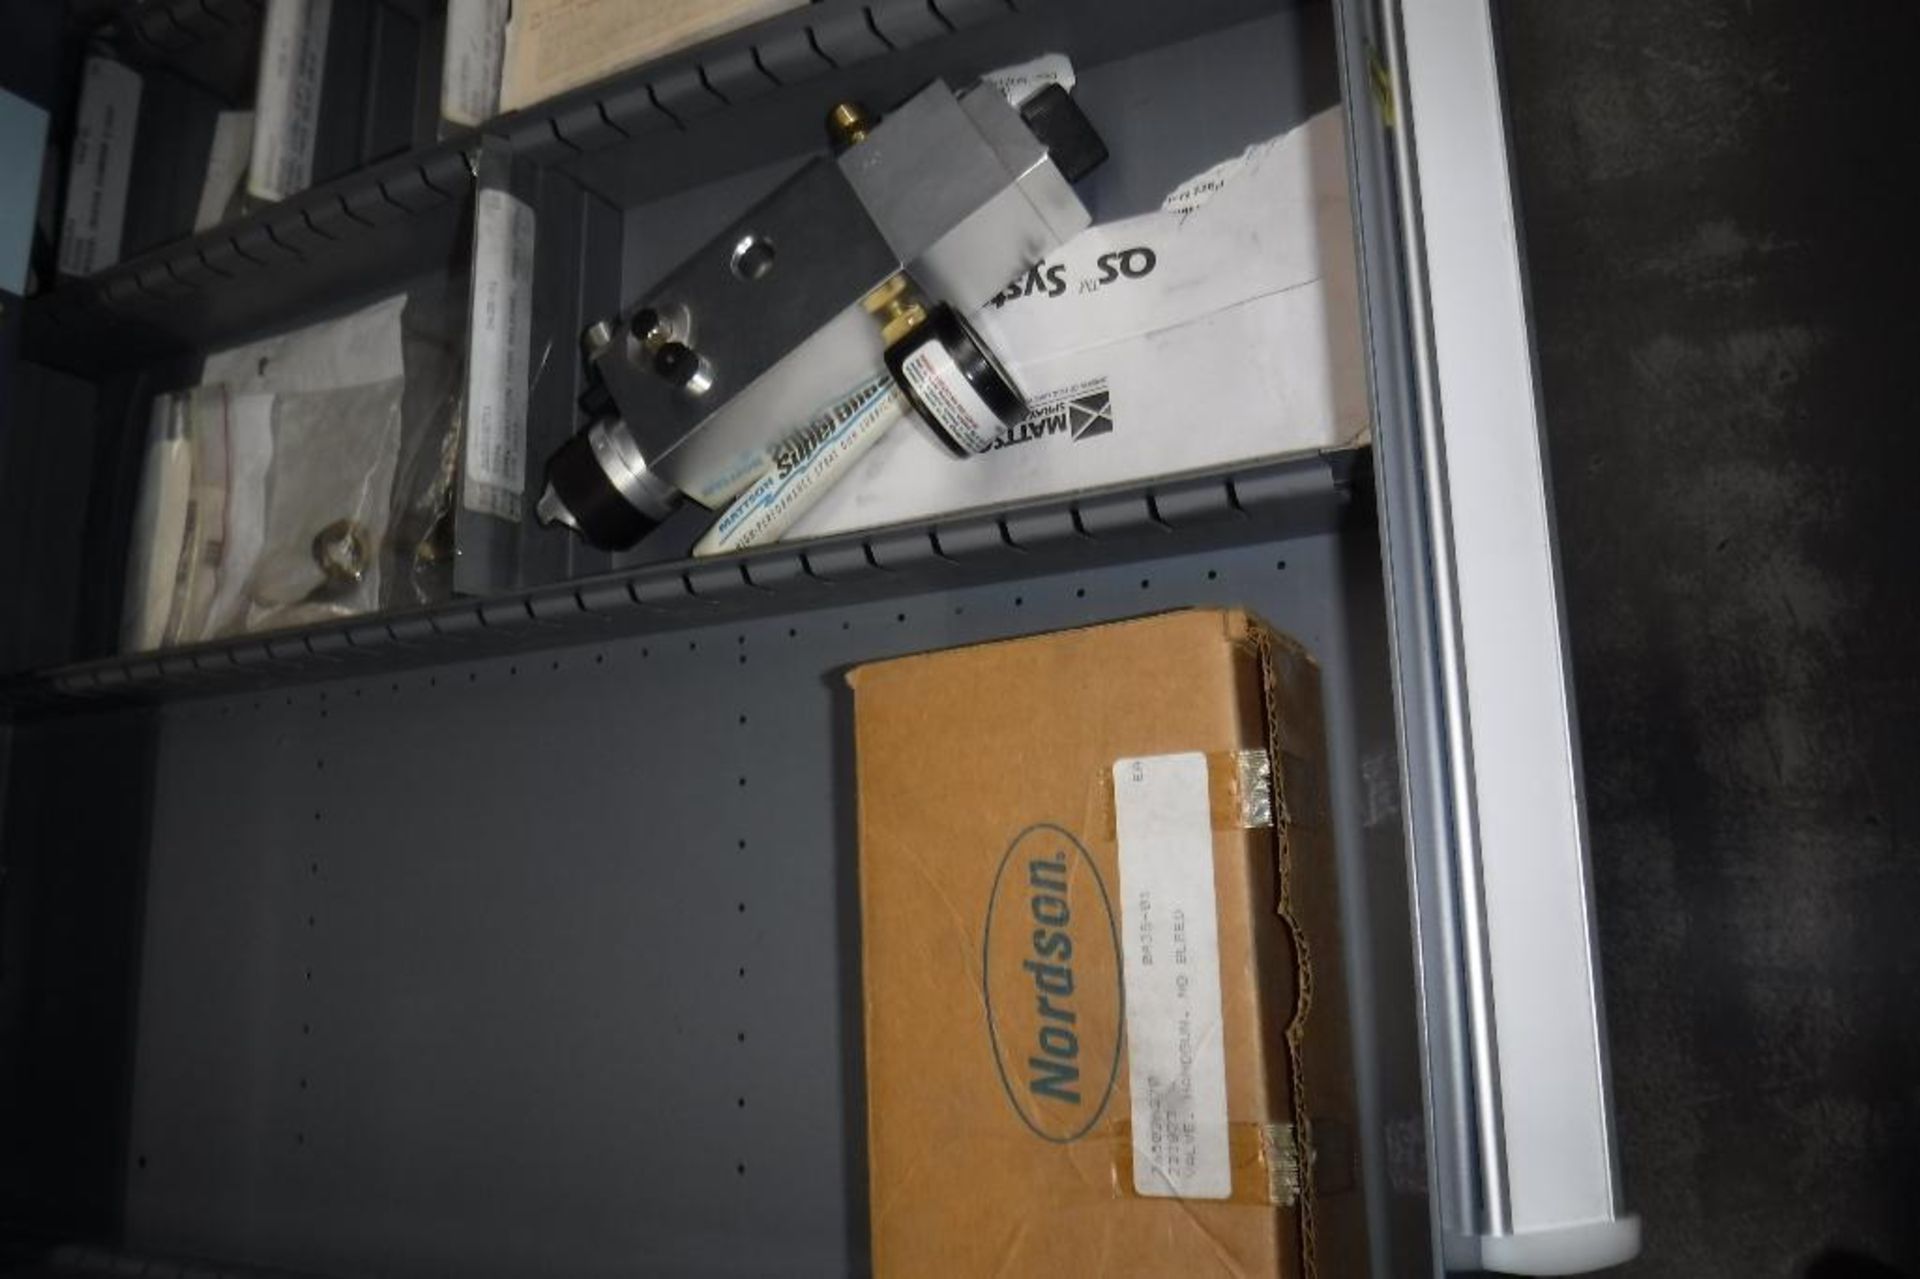 9-Drawer Vidmar Cabinet with Contents-Binks, Taylor Winfield, Sealant Equipment Parts, Vickers, Etc. - Image 12 of 13